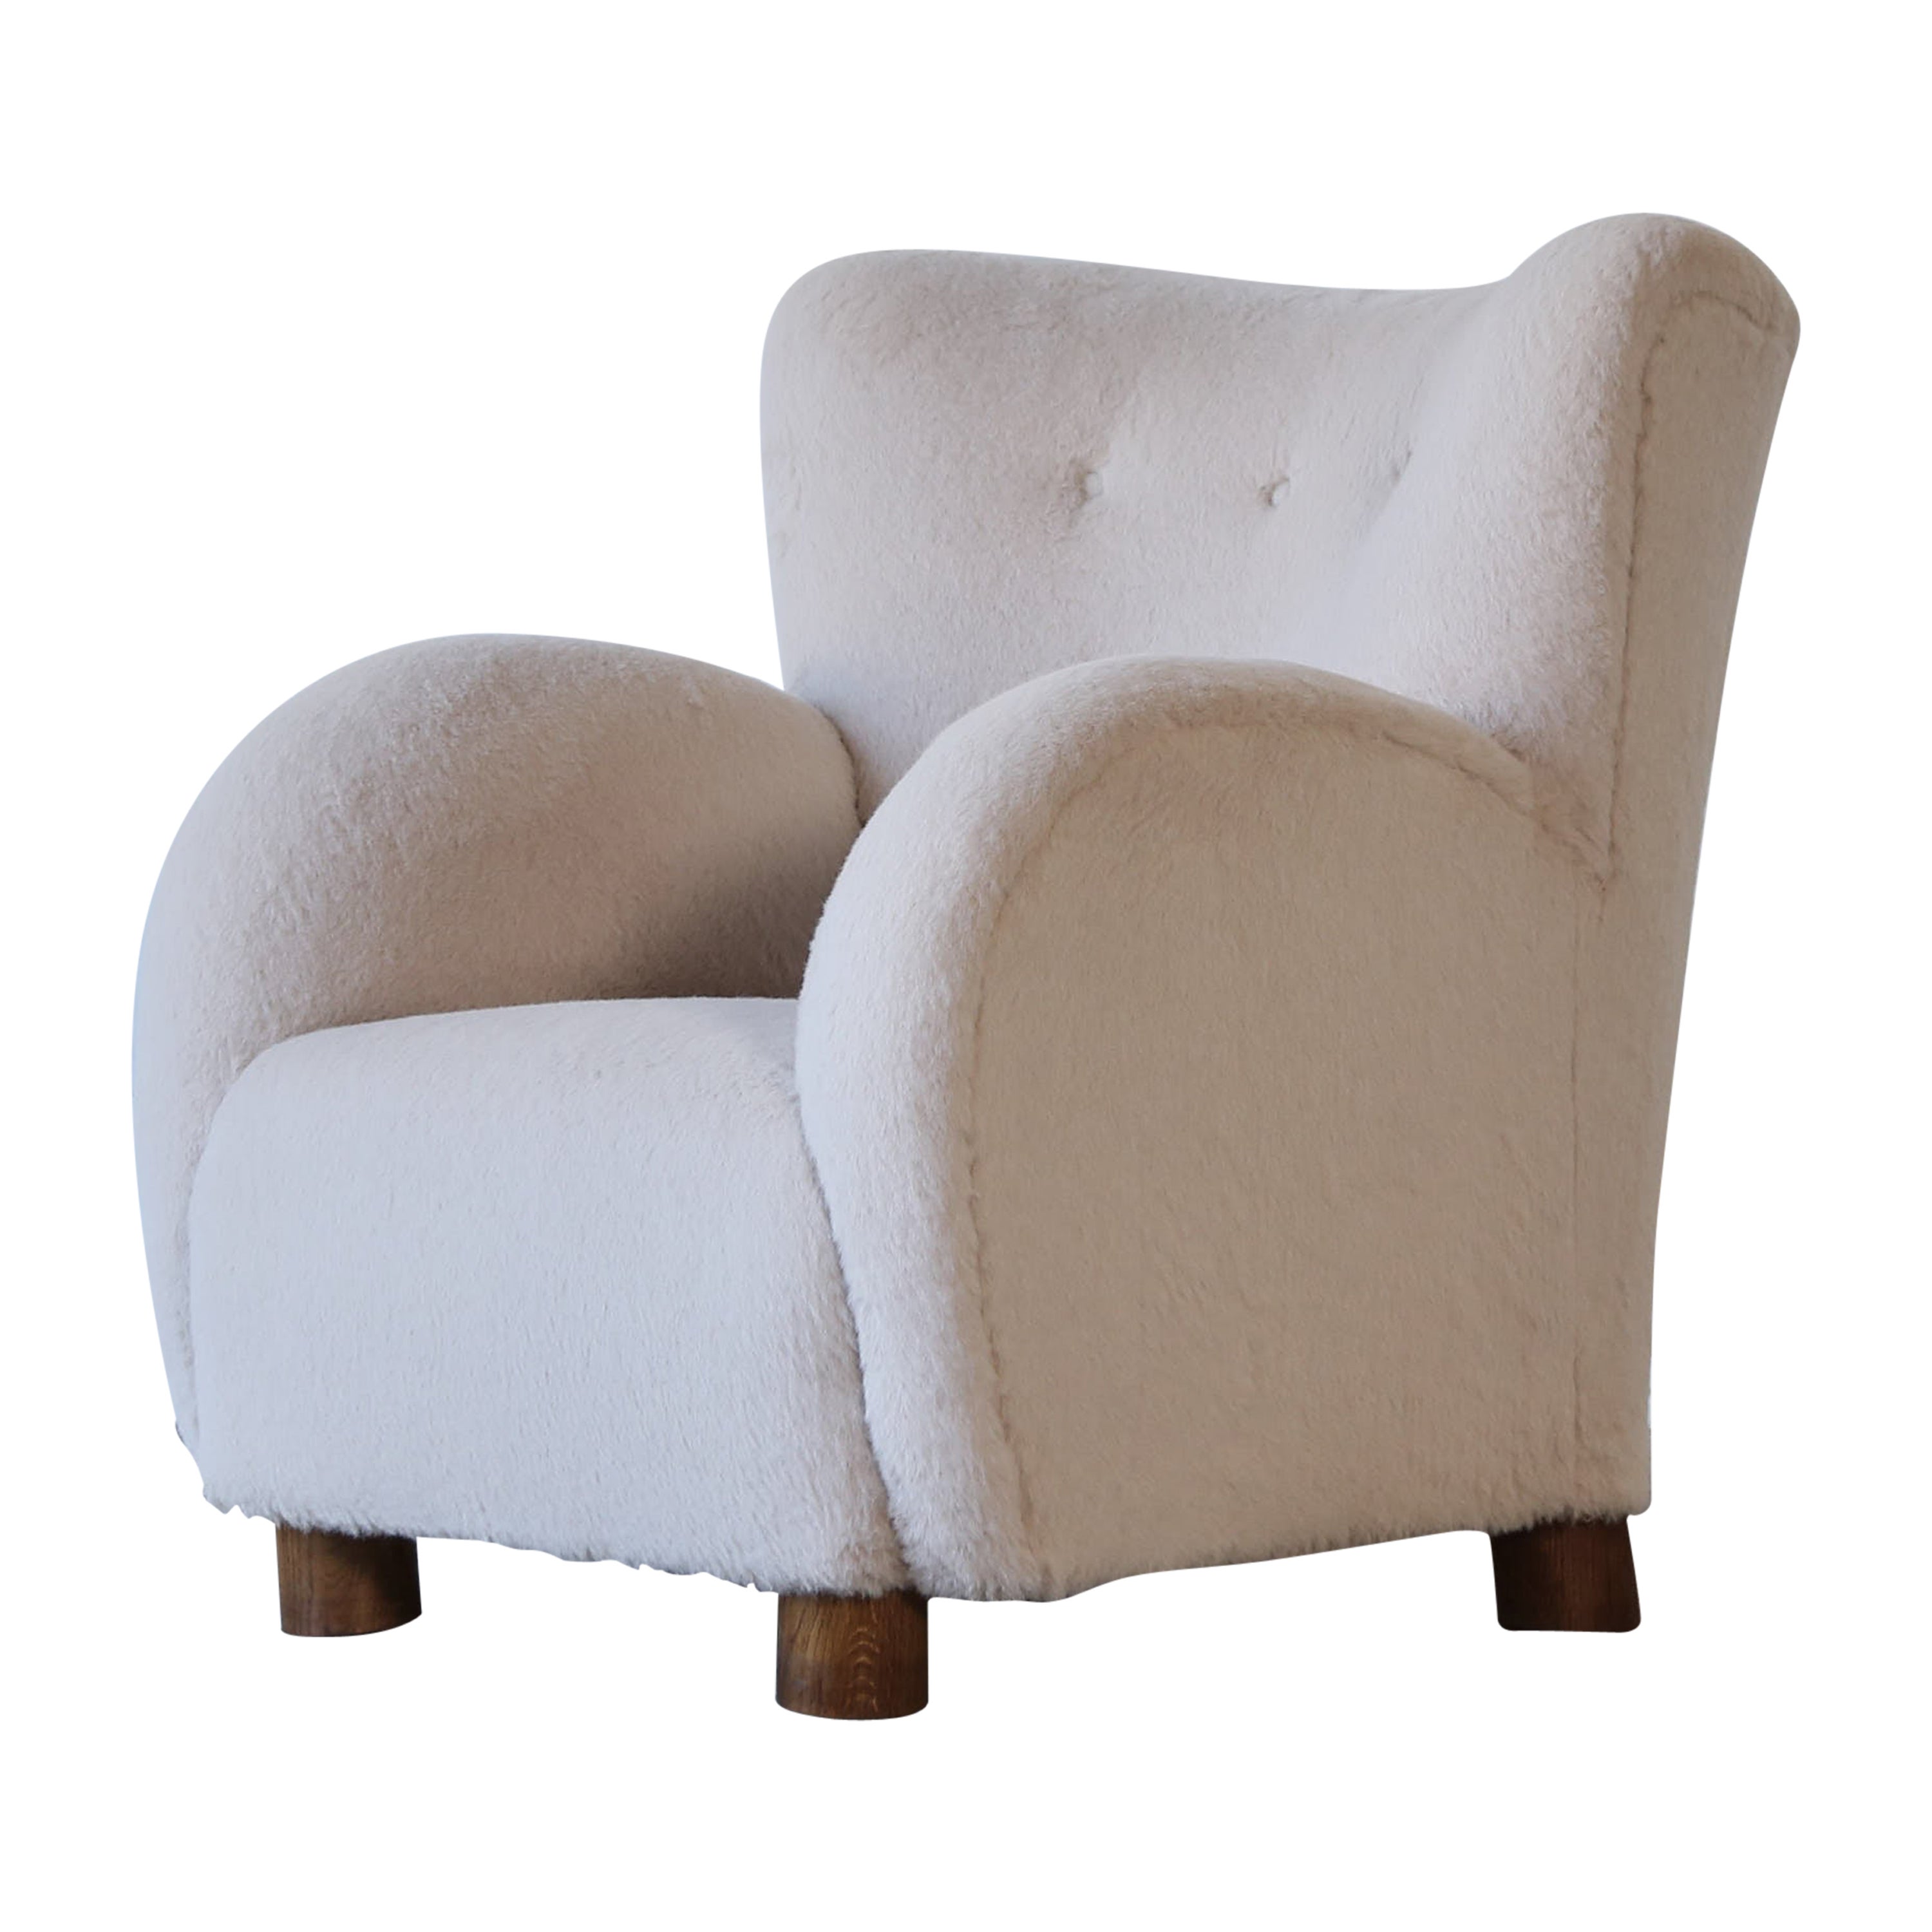 A Large Armchair, Reupholstered in Pure Alpaca Wool, Denmark, 1950s For Sale